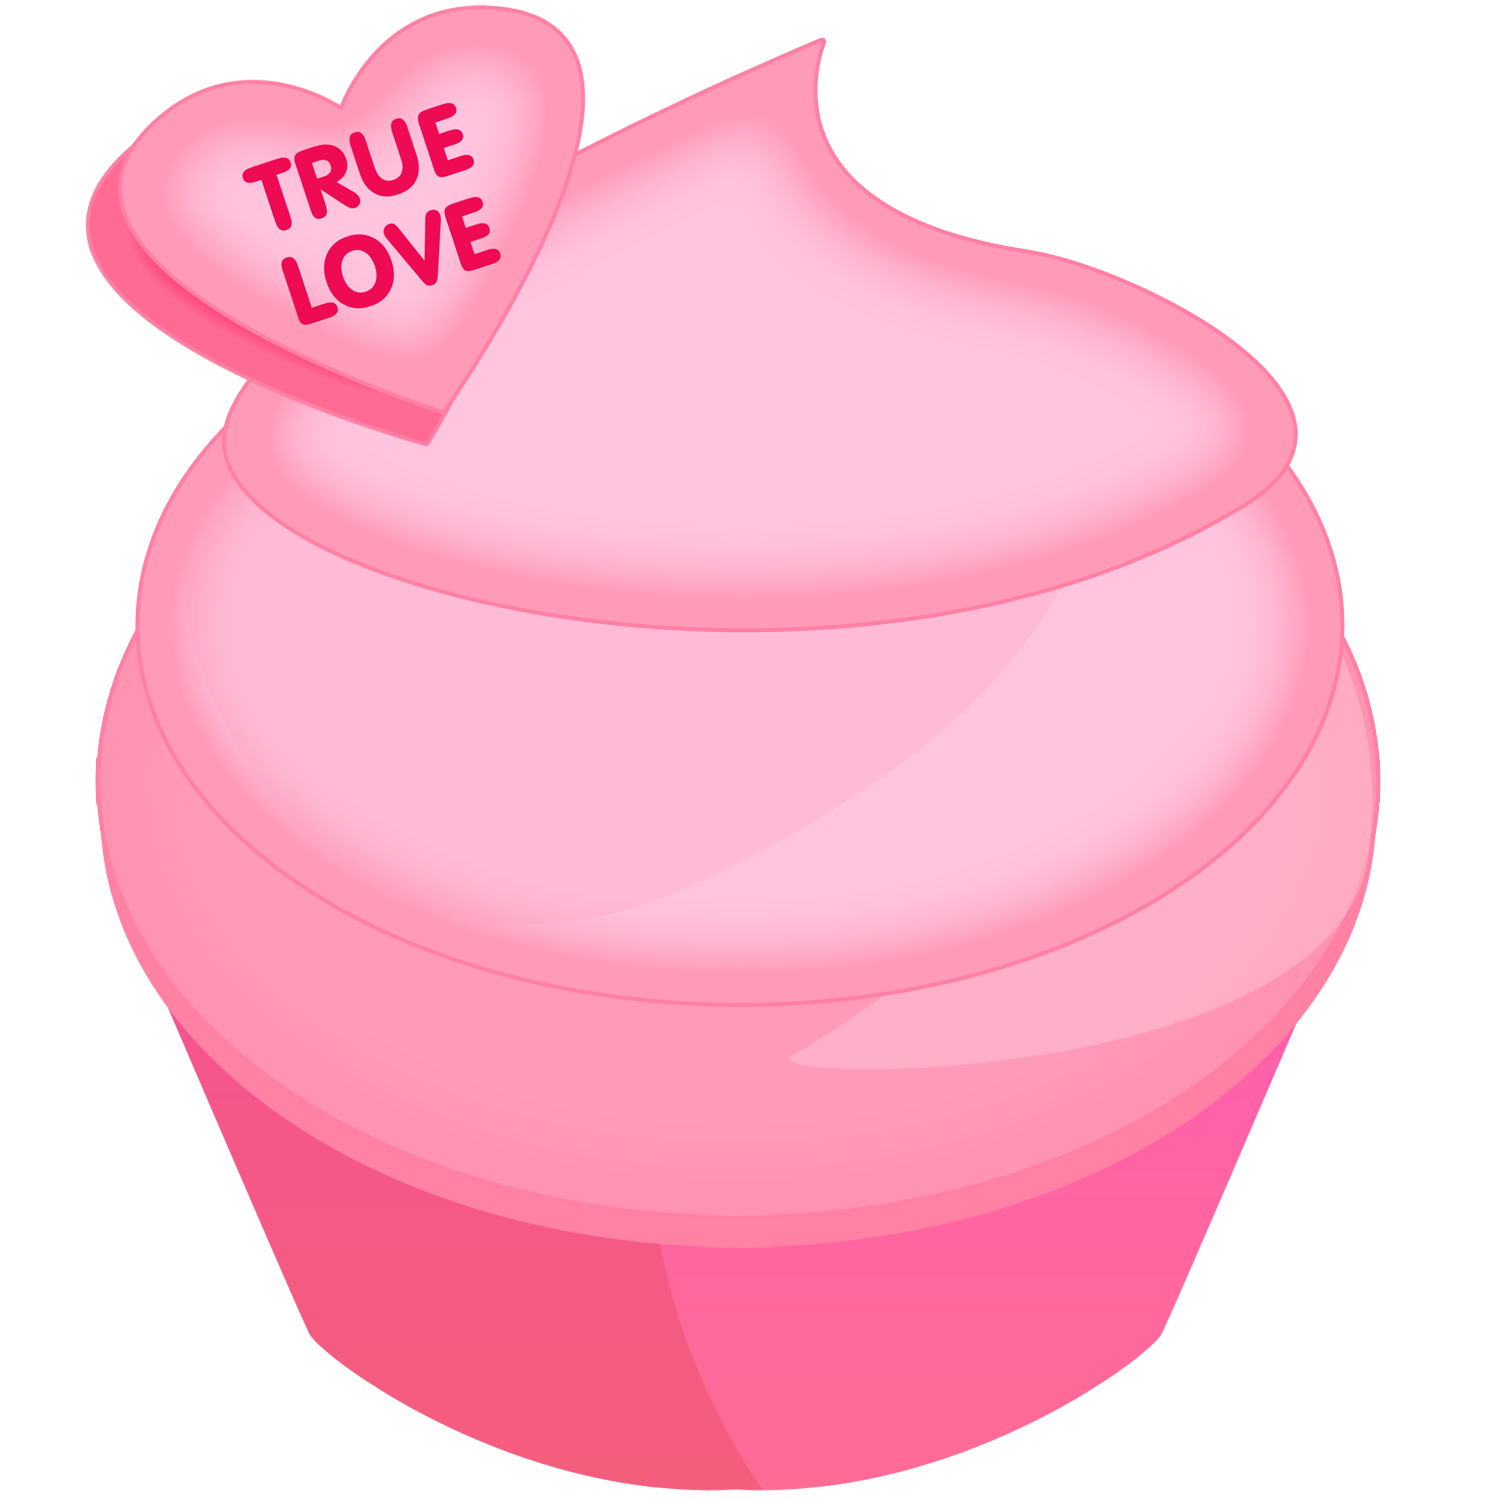 Valentines day cupcake clipart 